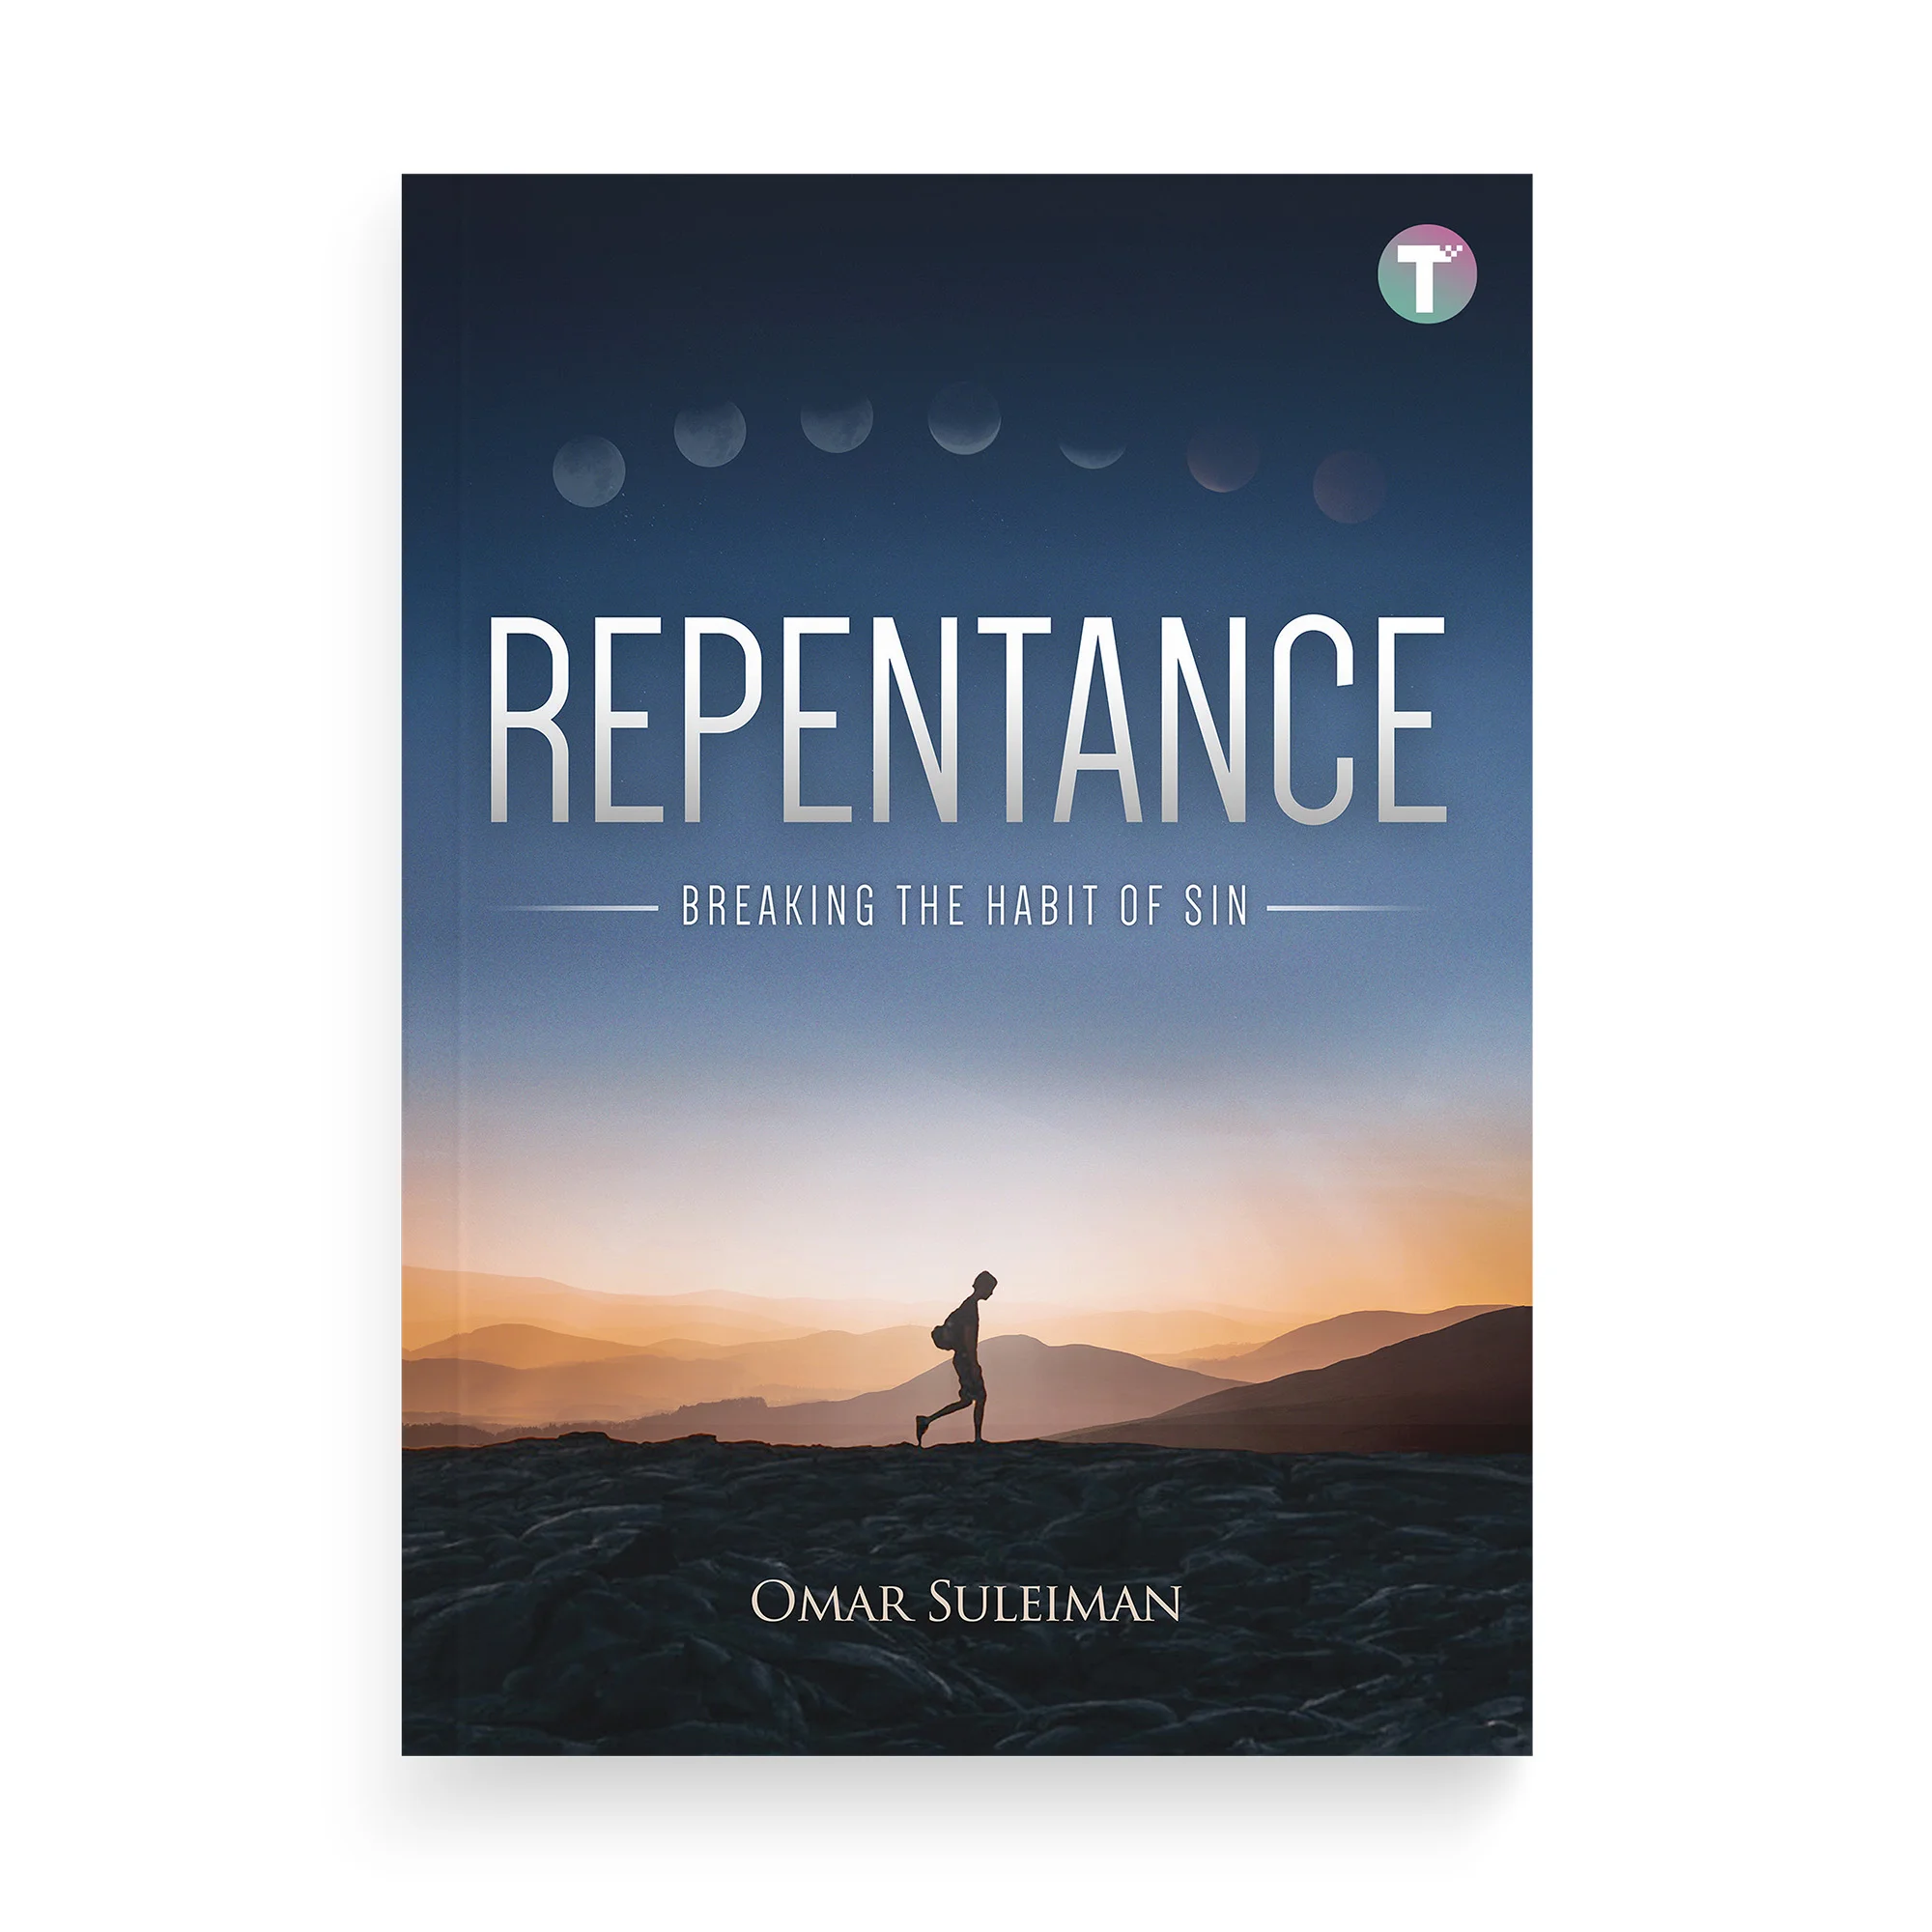 Repentance by Omar Suleiman